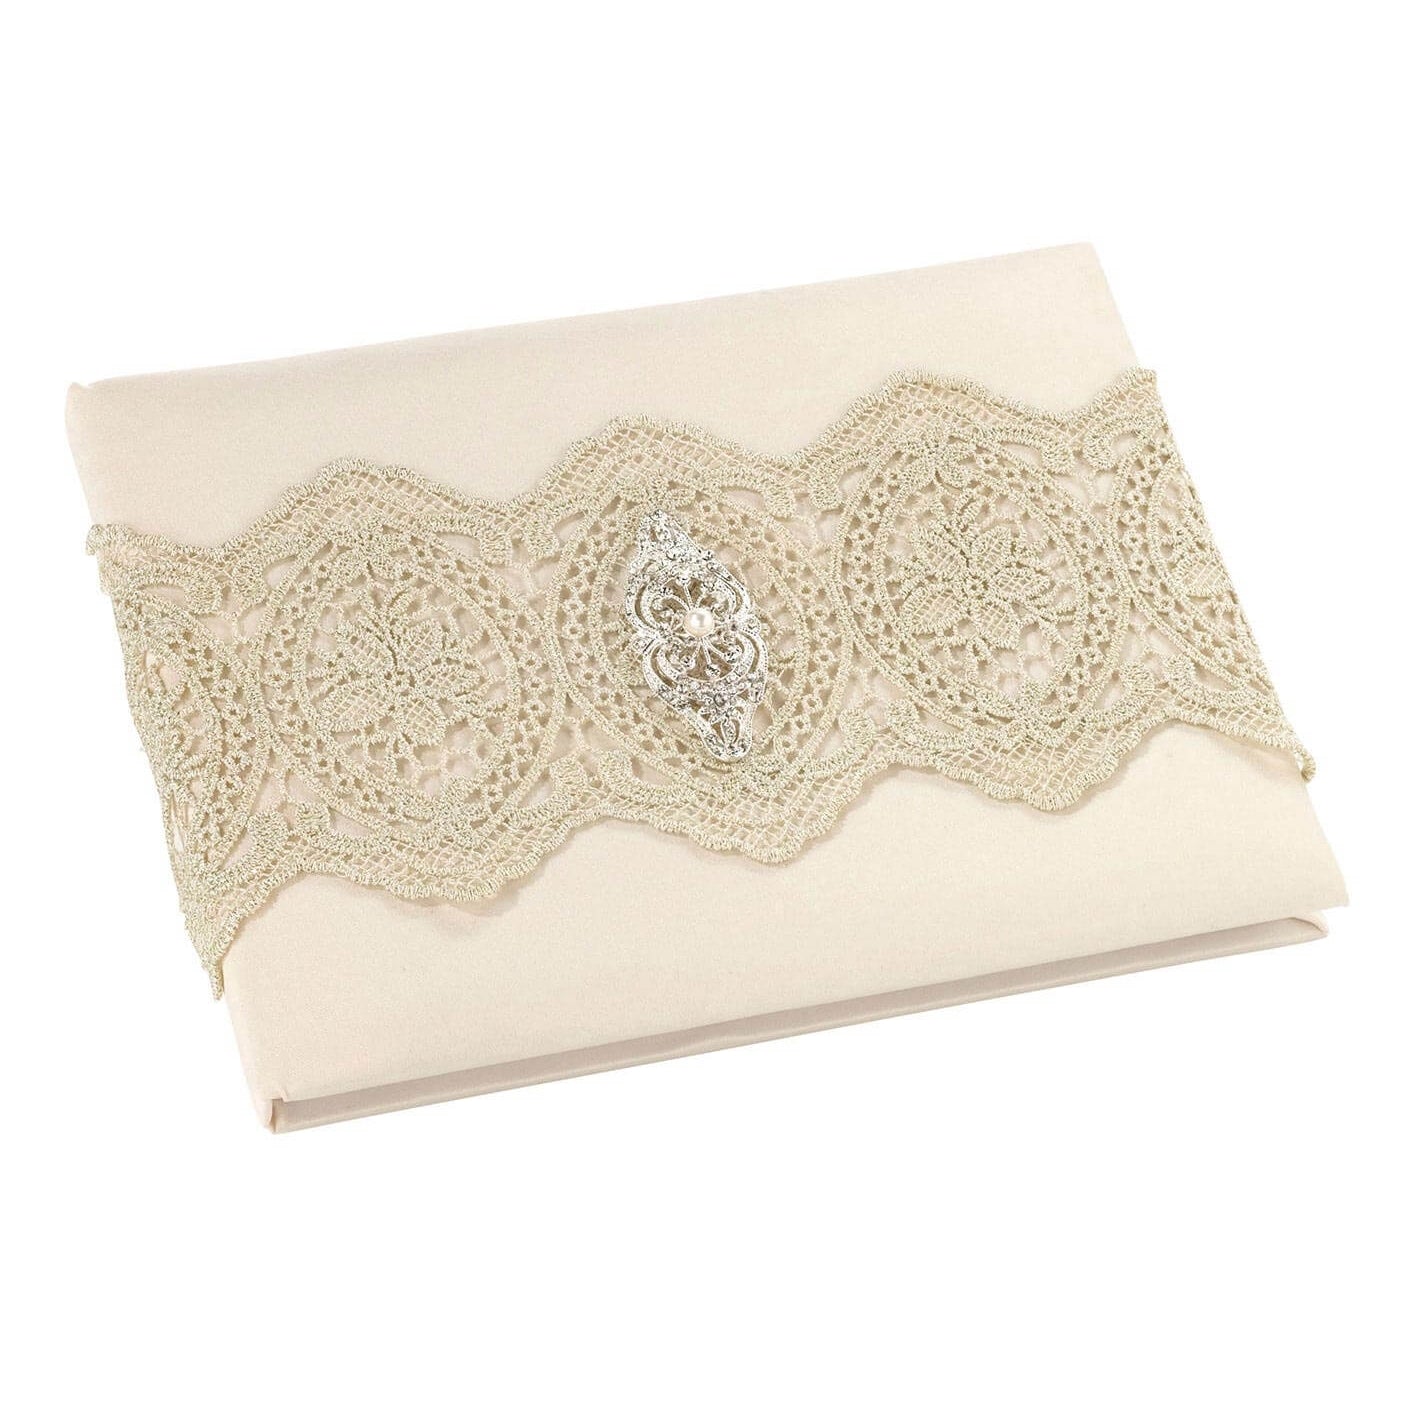 GOLD LACE GUEST BOOK | Bridal Gift - Guest Signing Book - Wedding Accessories - Minter and Richter Designs